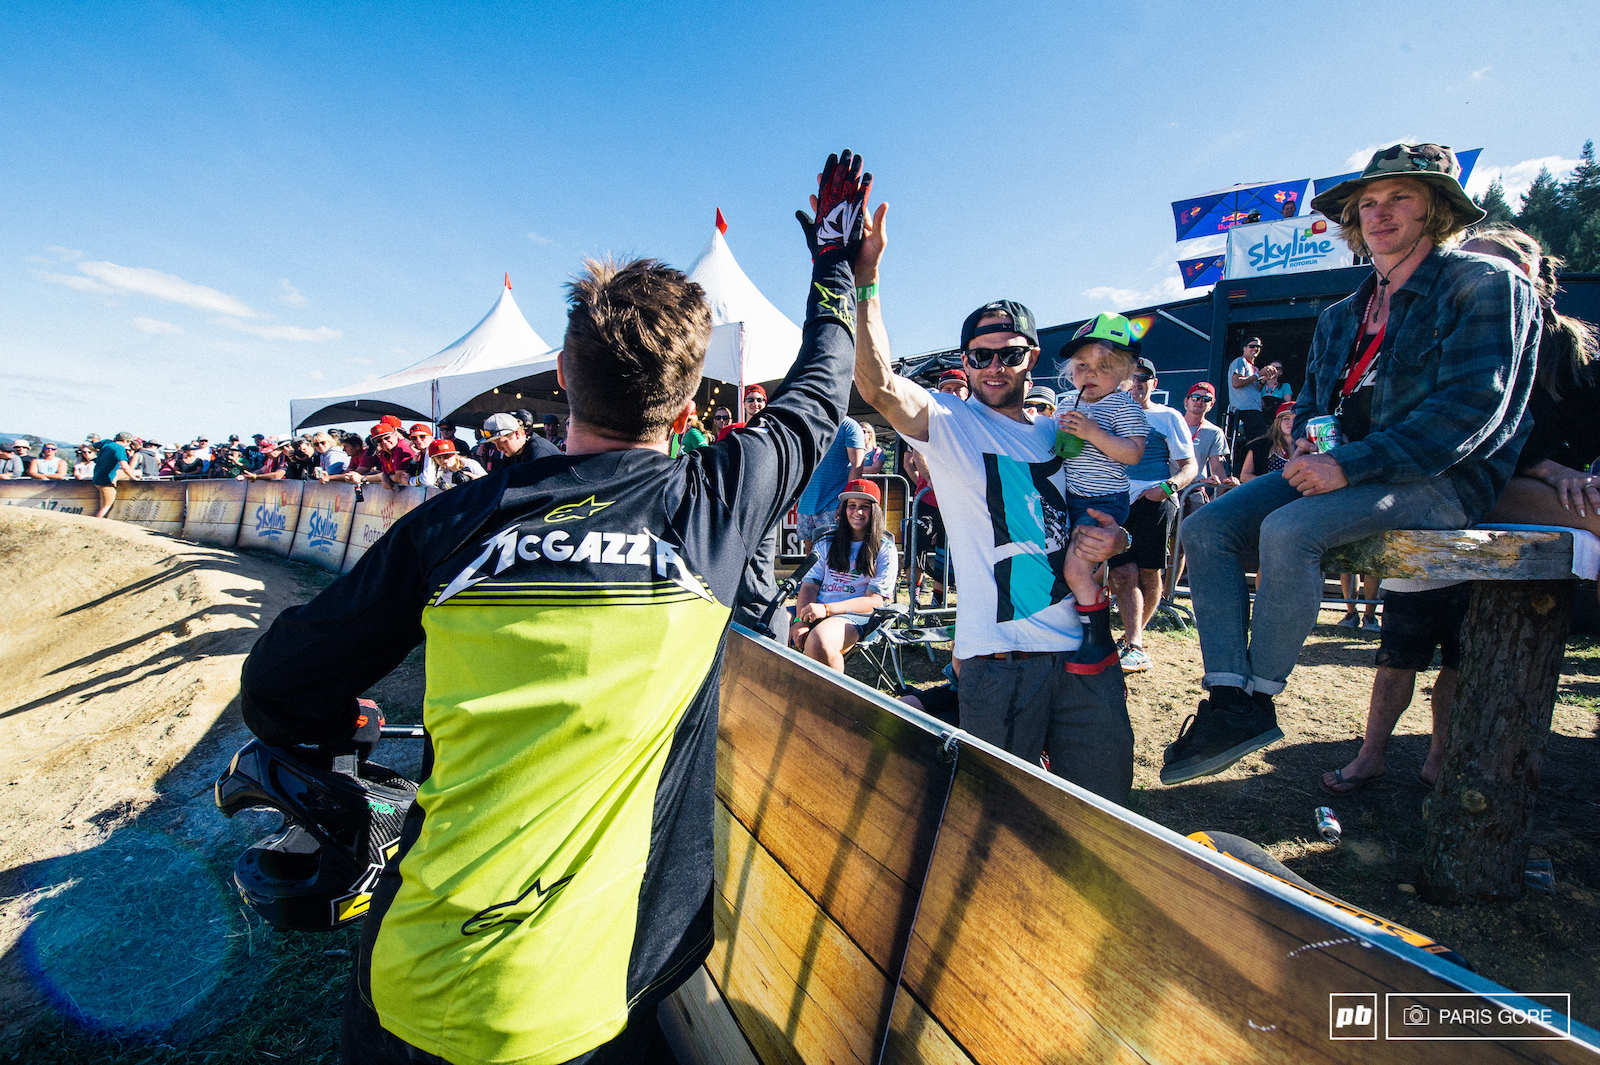 High fives all around for Nicholi Rogatkin for landing the first 1080 in a contest run.